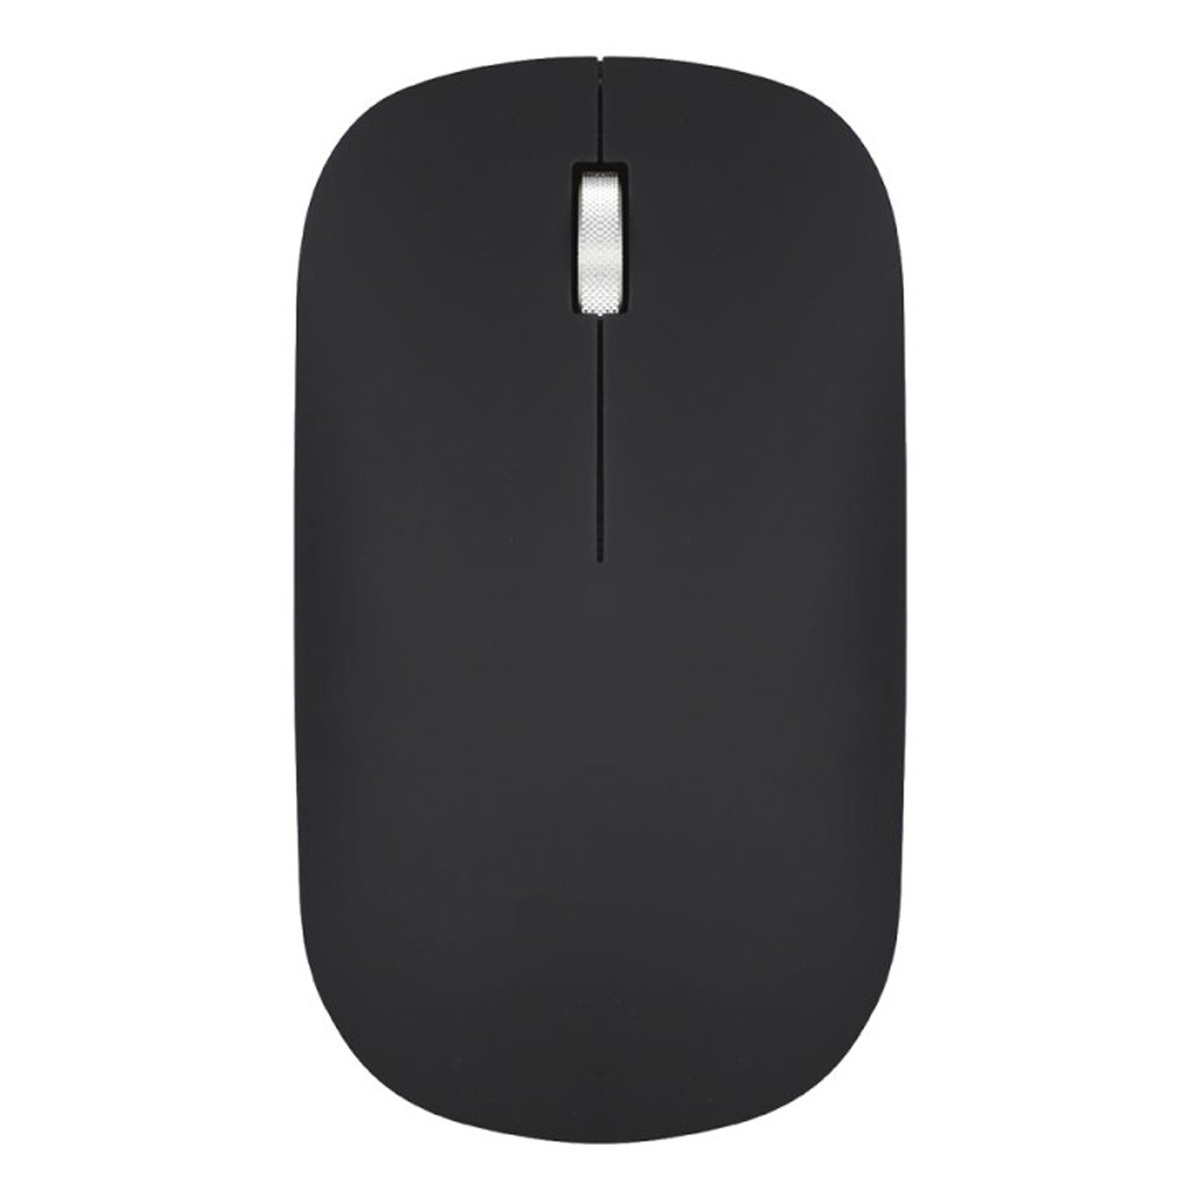 Trands Rechargeable Optical Mouse, Assorted Colors, TR-MU570